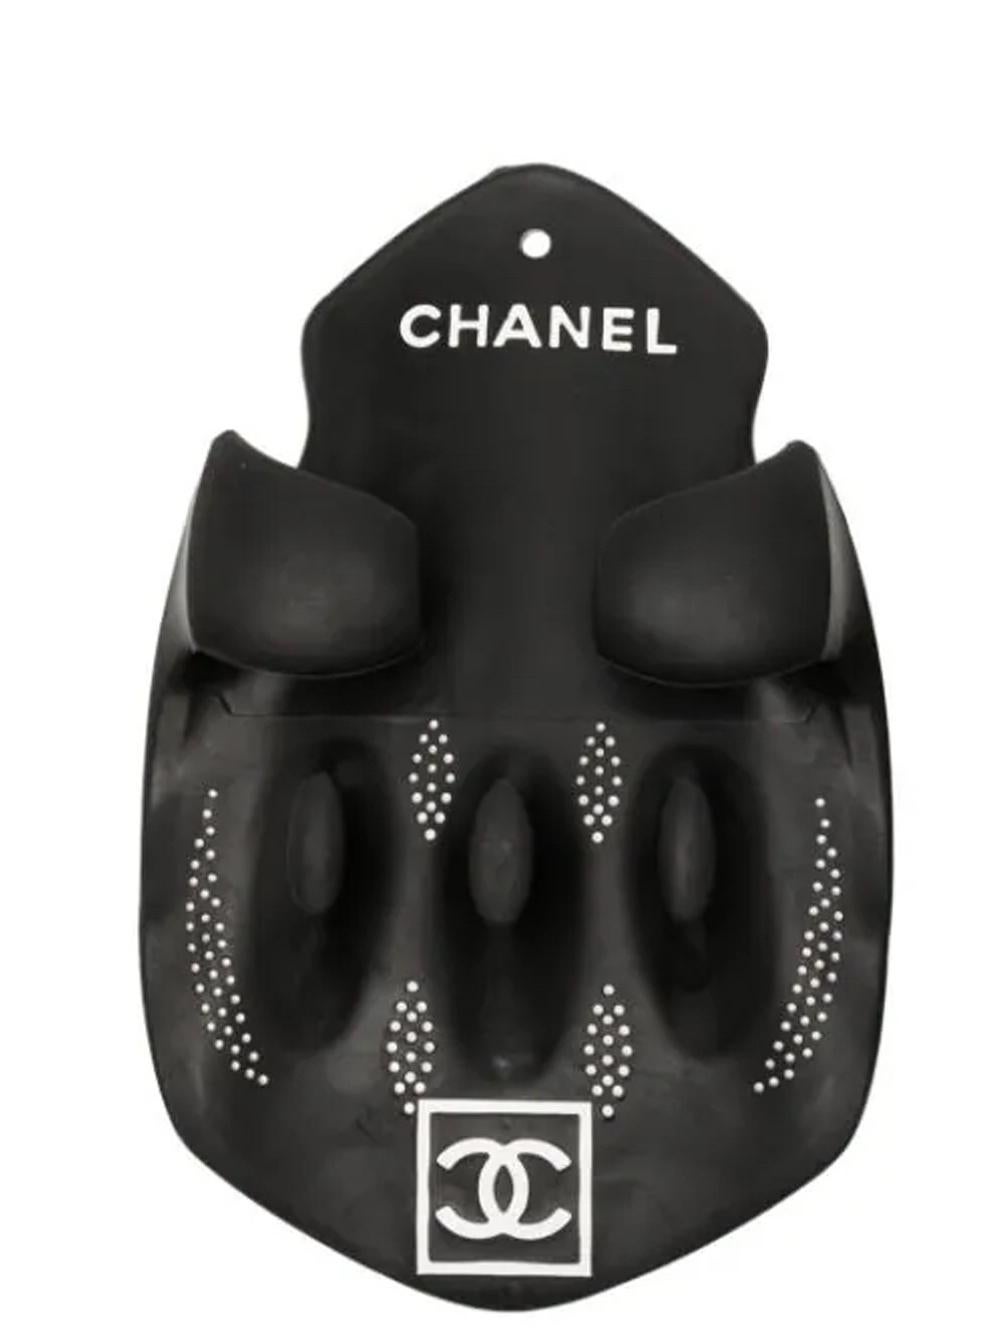 Black Chanel Limited Edition Swimming Peddlers For Sale